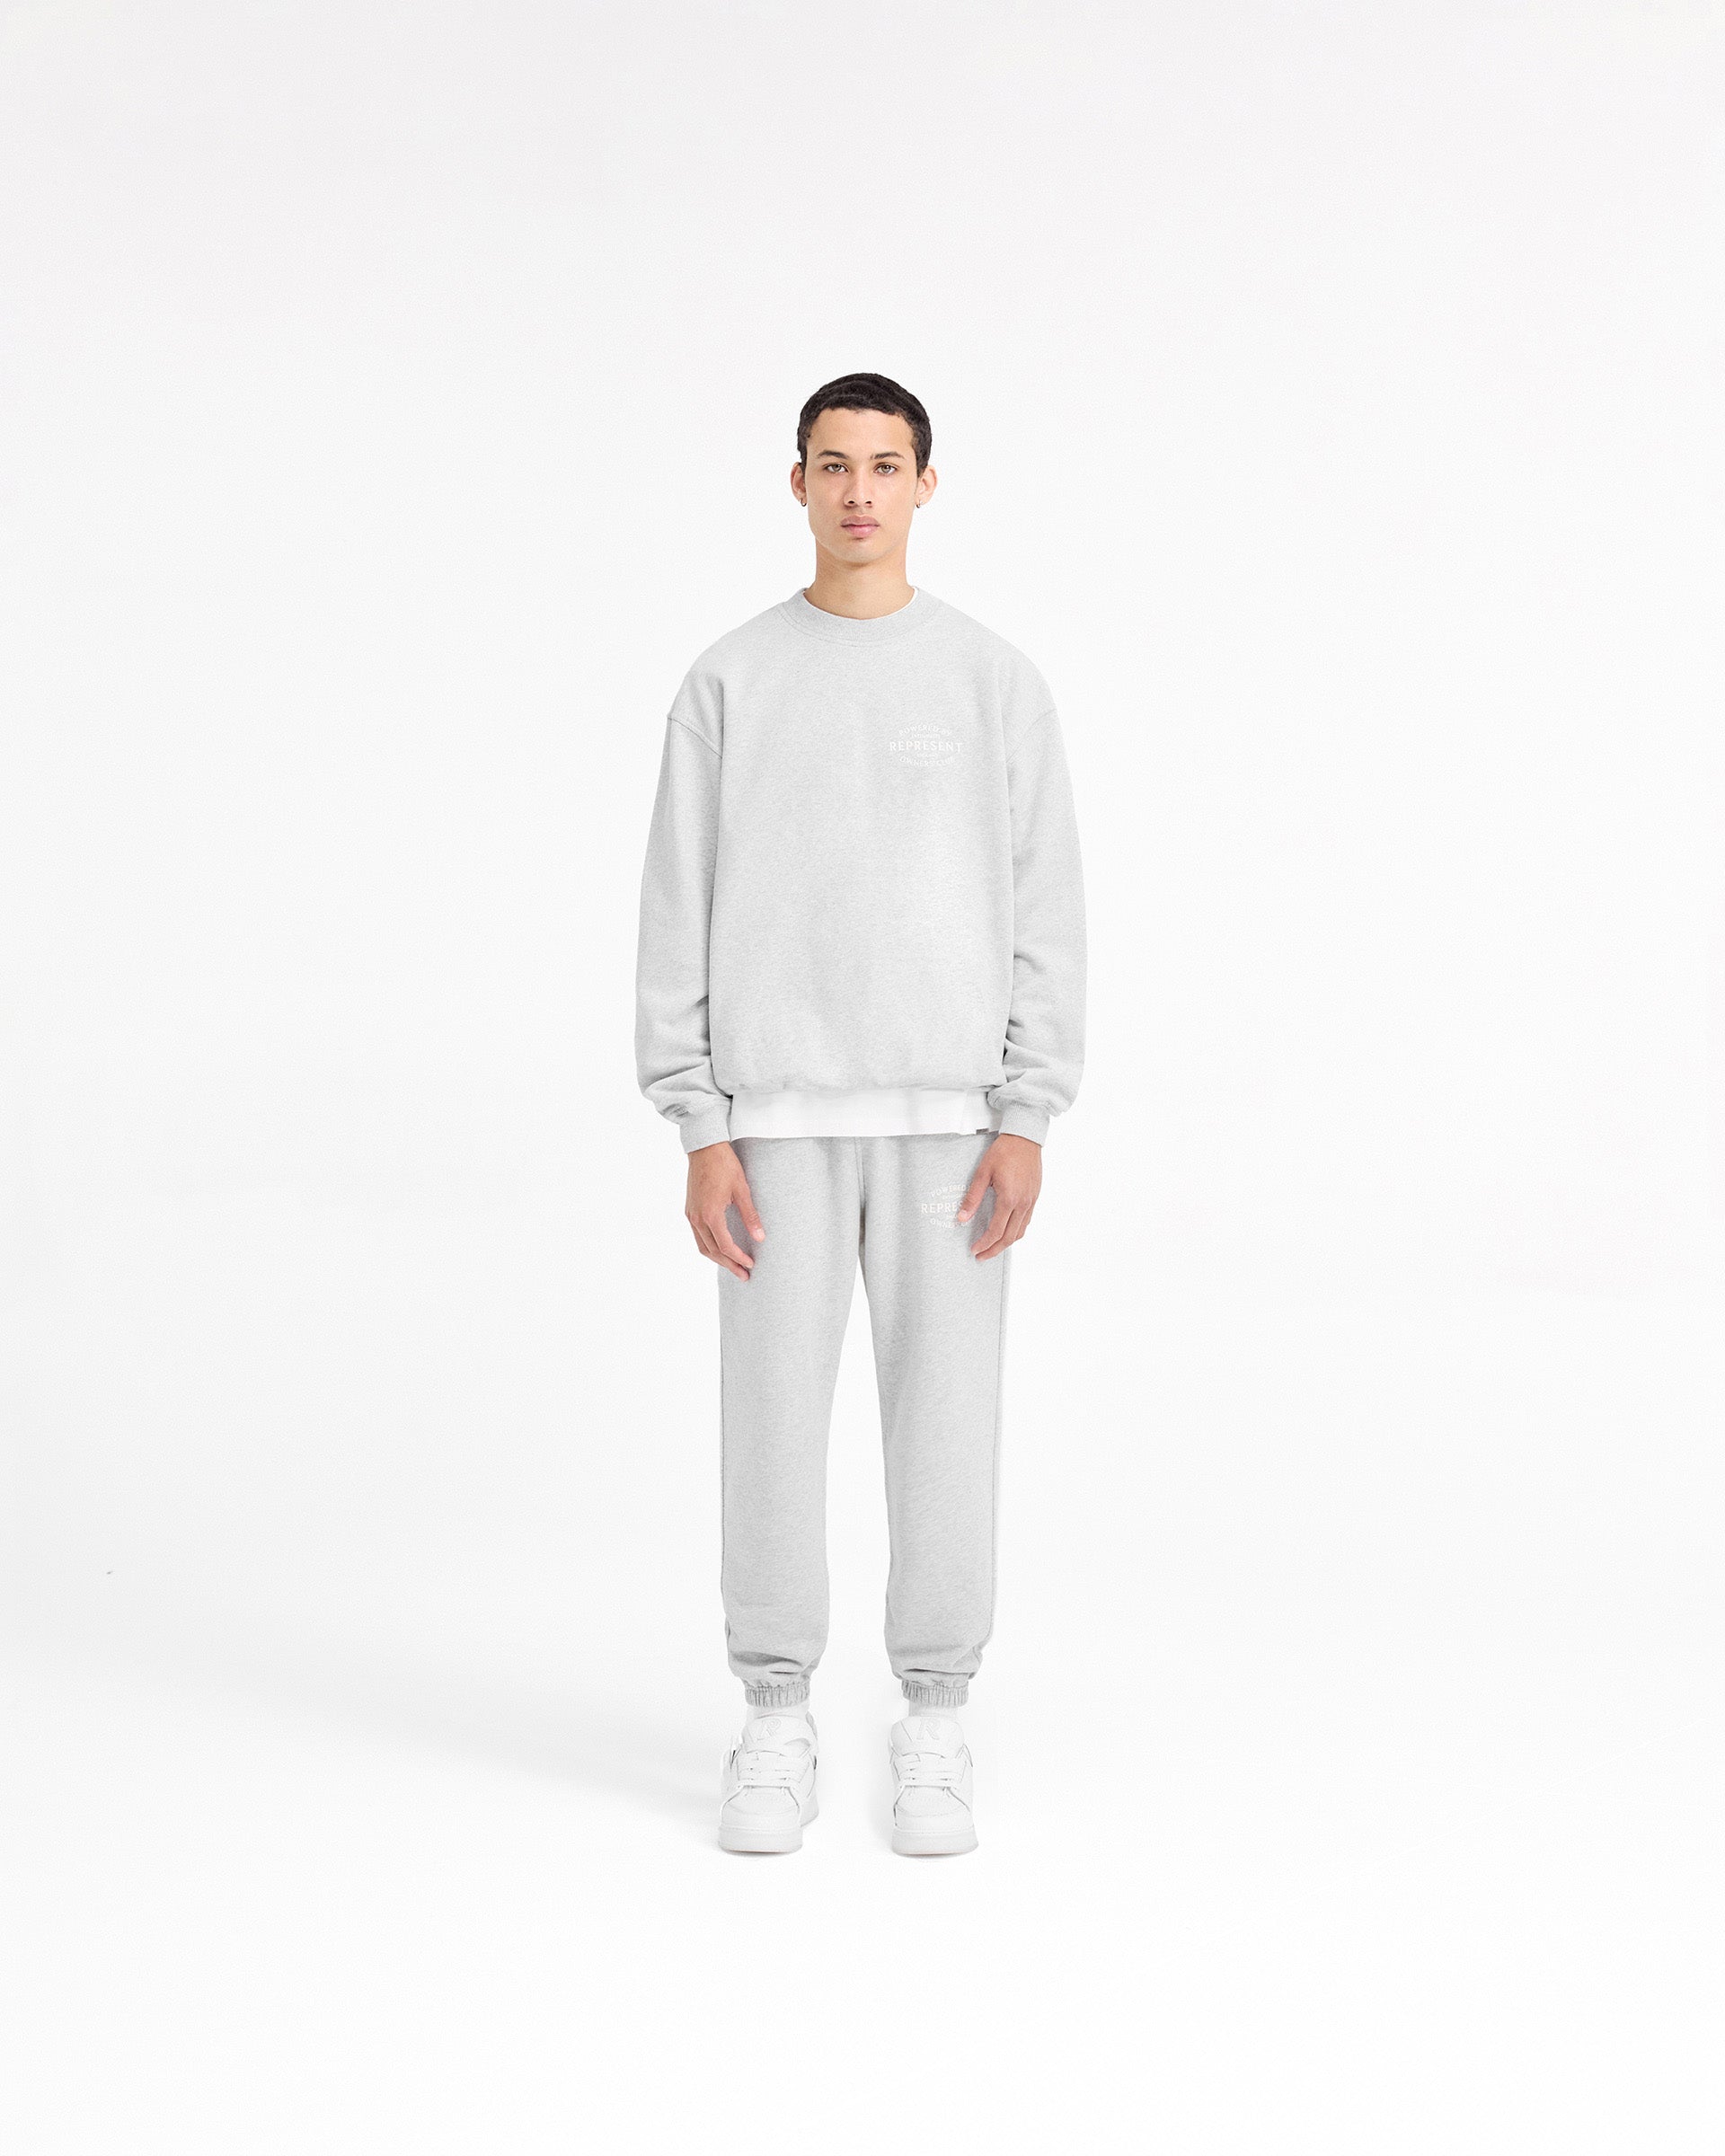 Represent Owners Club Stamp Sweater - Ash Grey